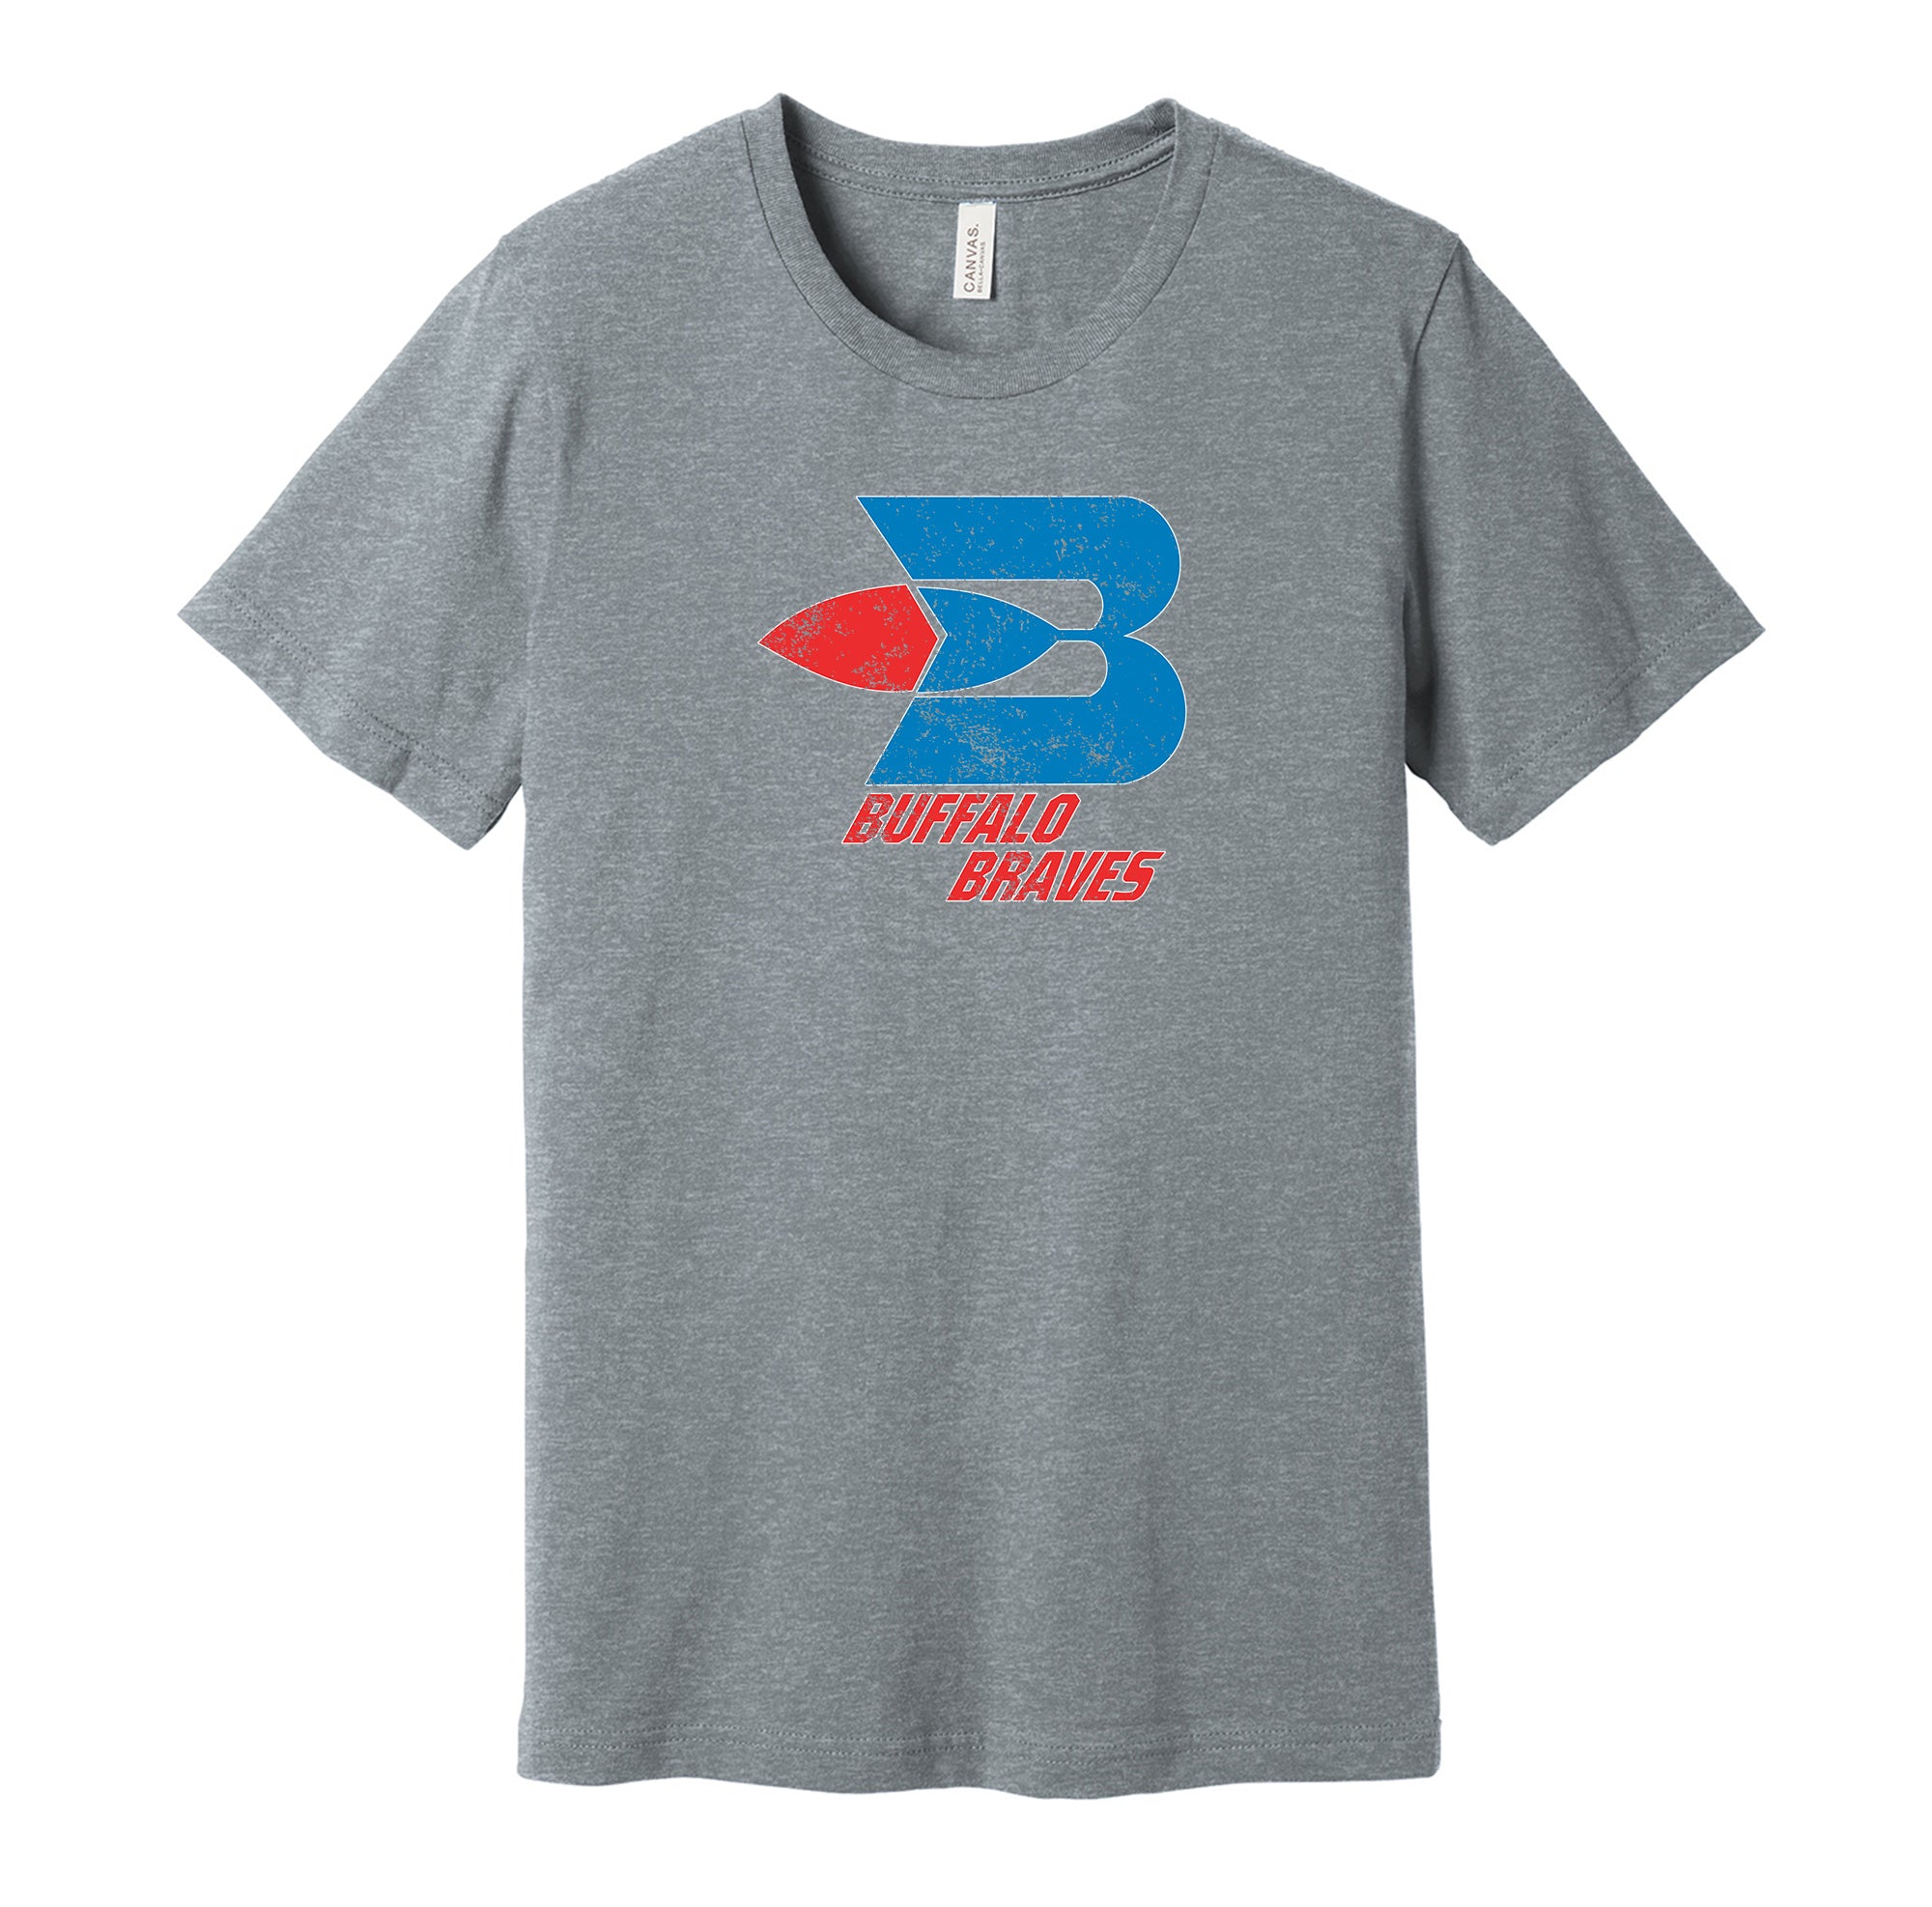 Buffalo Braves Distressed Logo Shirt - Defunct Sports Team - Celebrate New  York Heritage and History - Hyper Than Hype